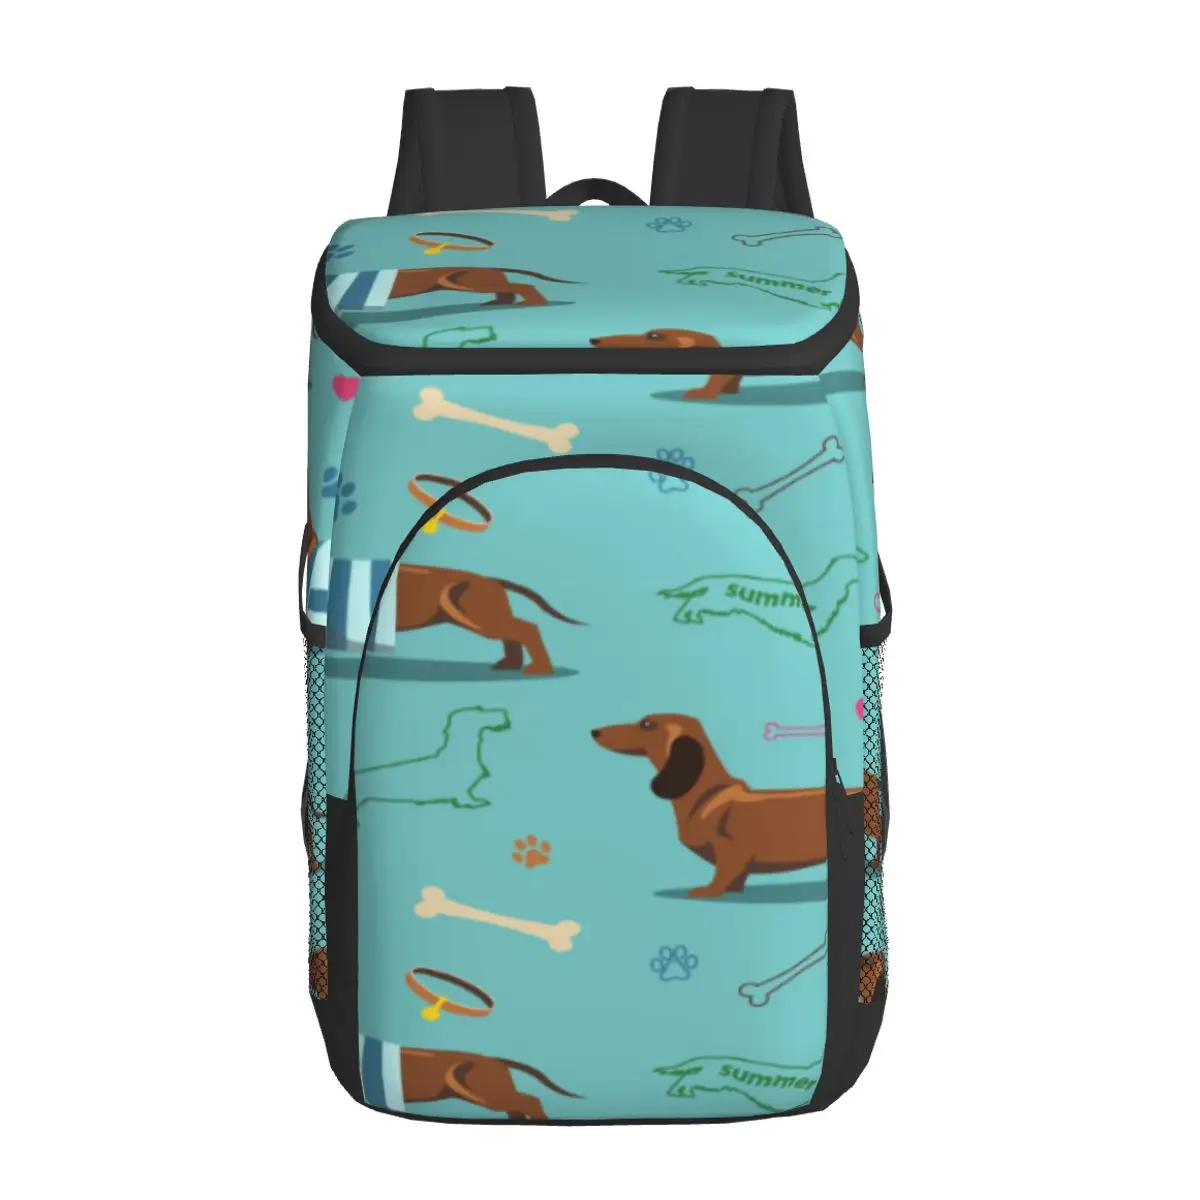 protable insulated thermal cooler waterproof lunch bag dachshund dogs and bones picnic camping backpack double shoulder wine bag free global shipping